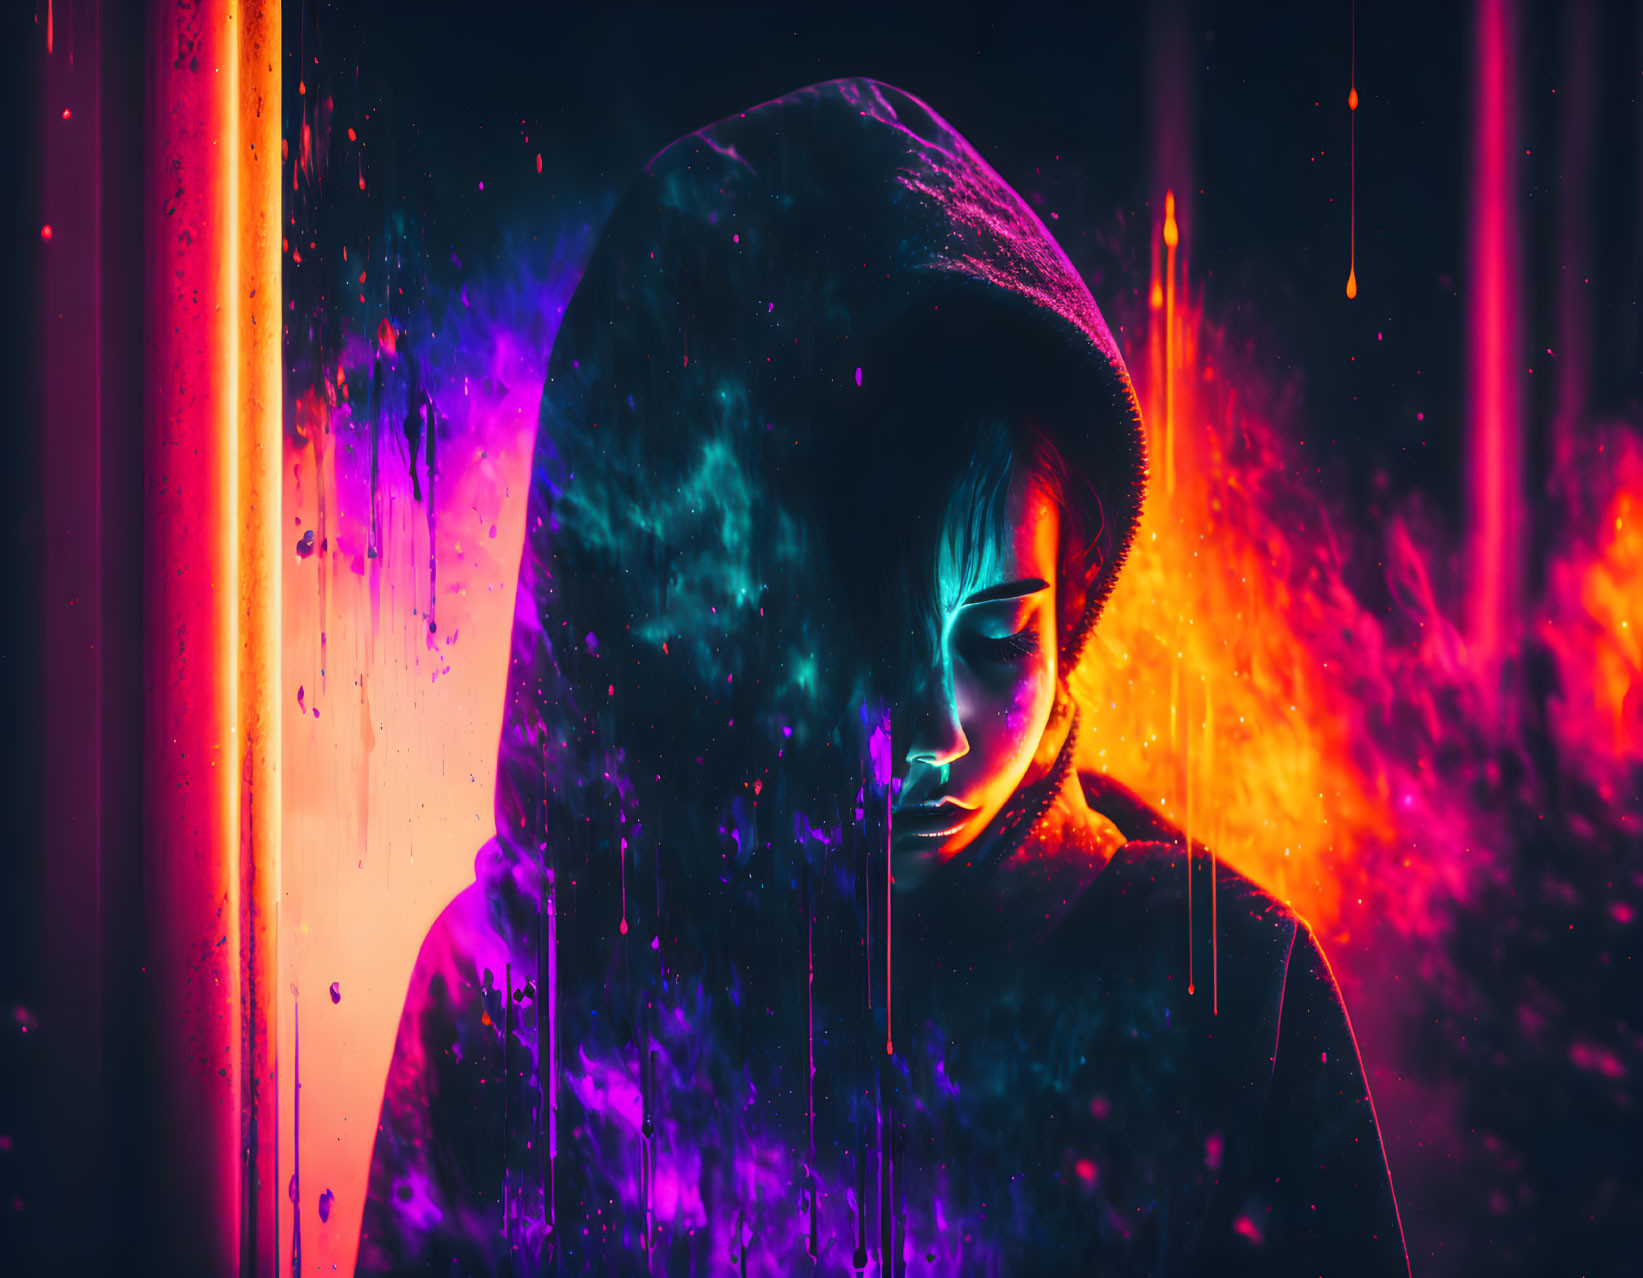 Hooded figure with vibrant neon glow and contrasting colors